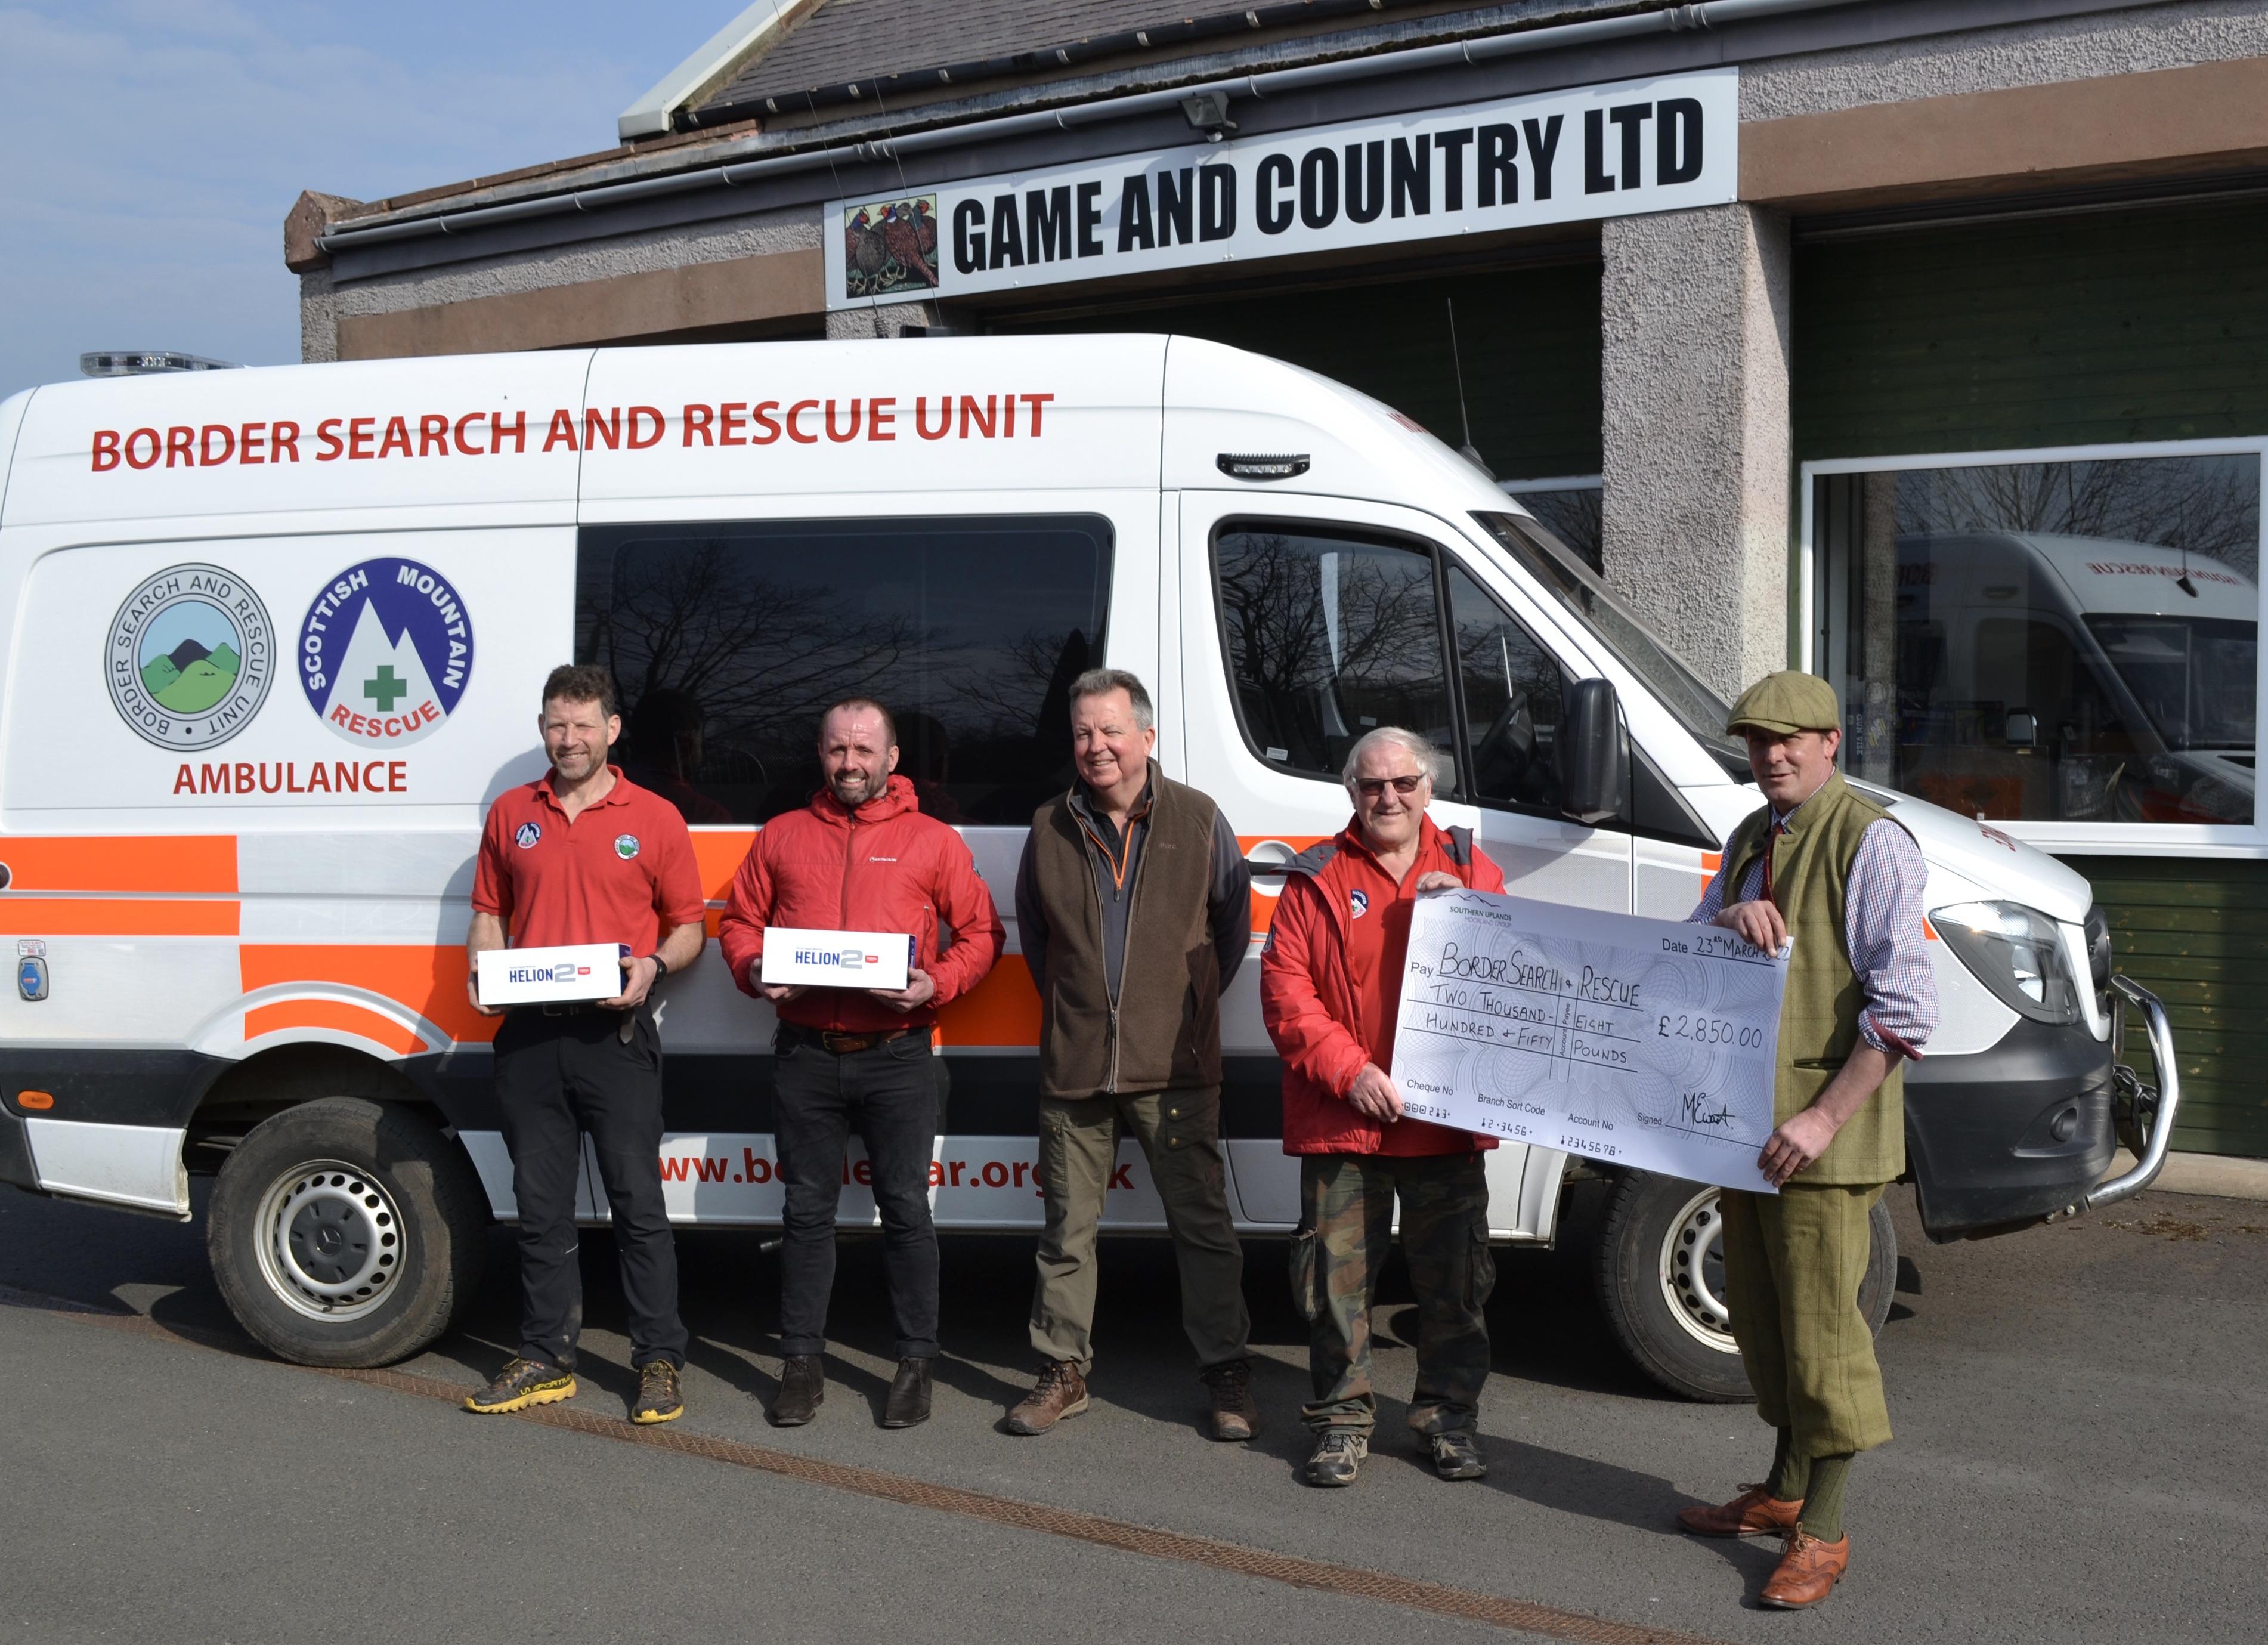 Local Moorland Group assist Border Search & Rescue